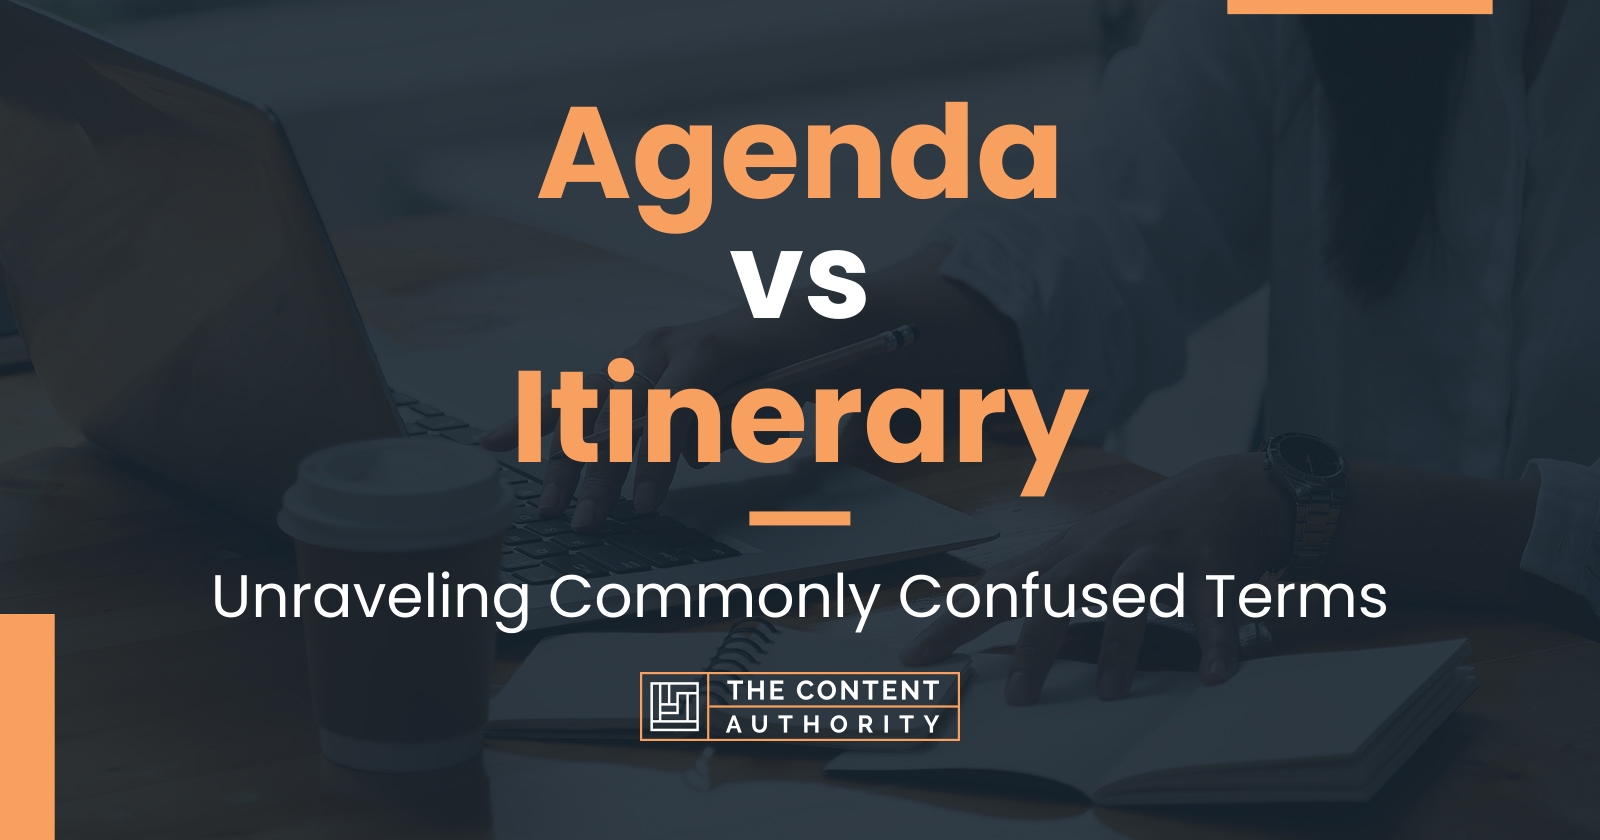 Agenda vs Itinerary: Unraveling Commonly Confused Terms